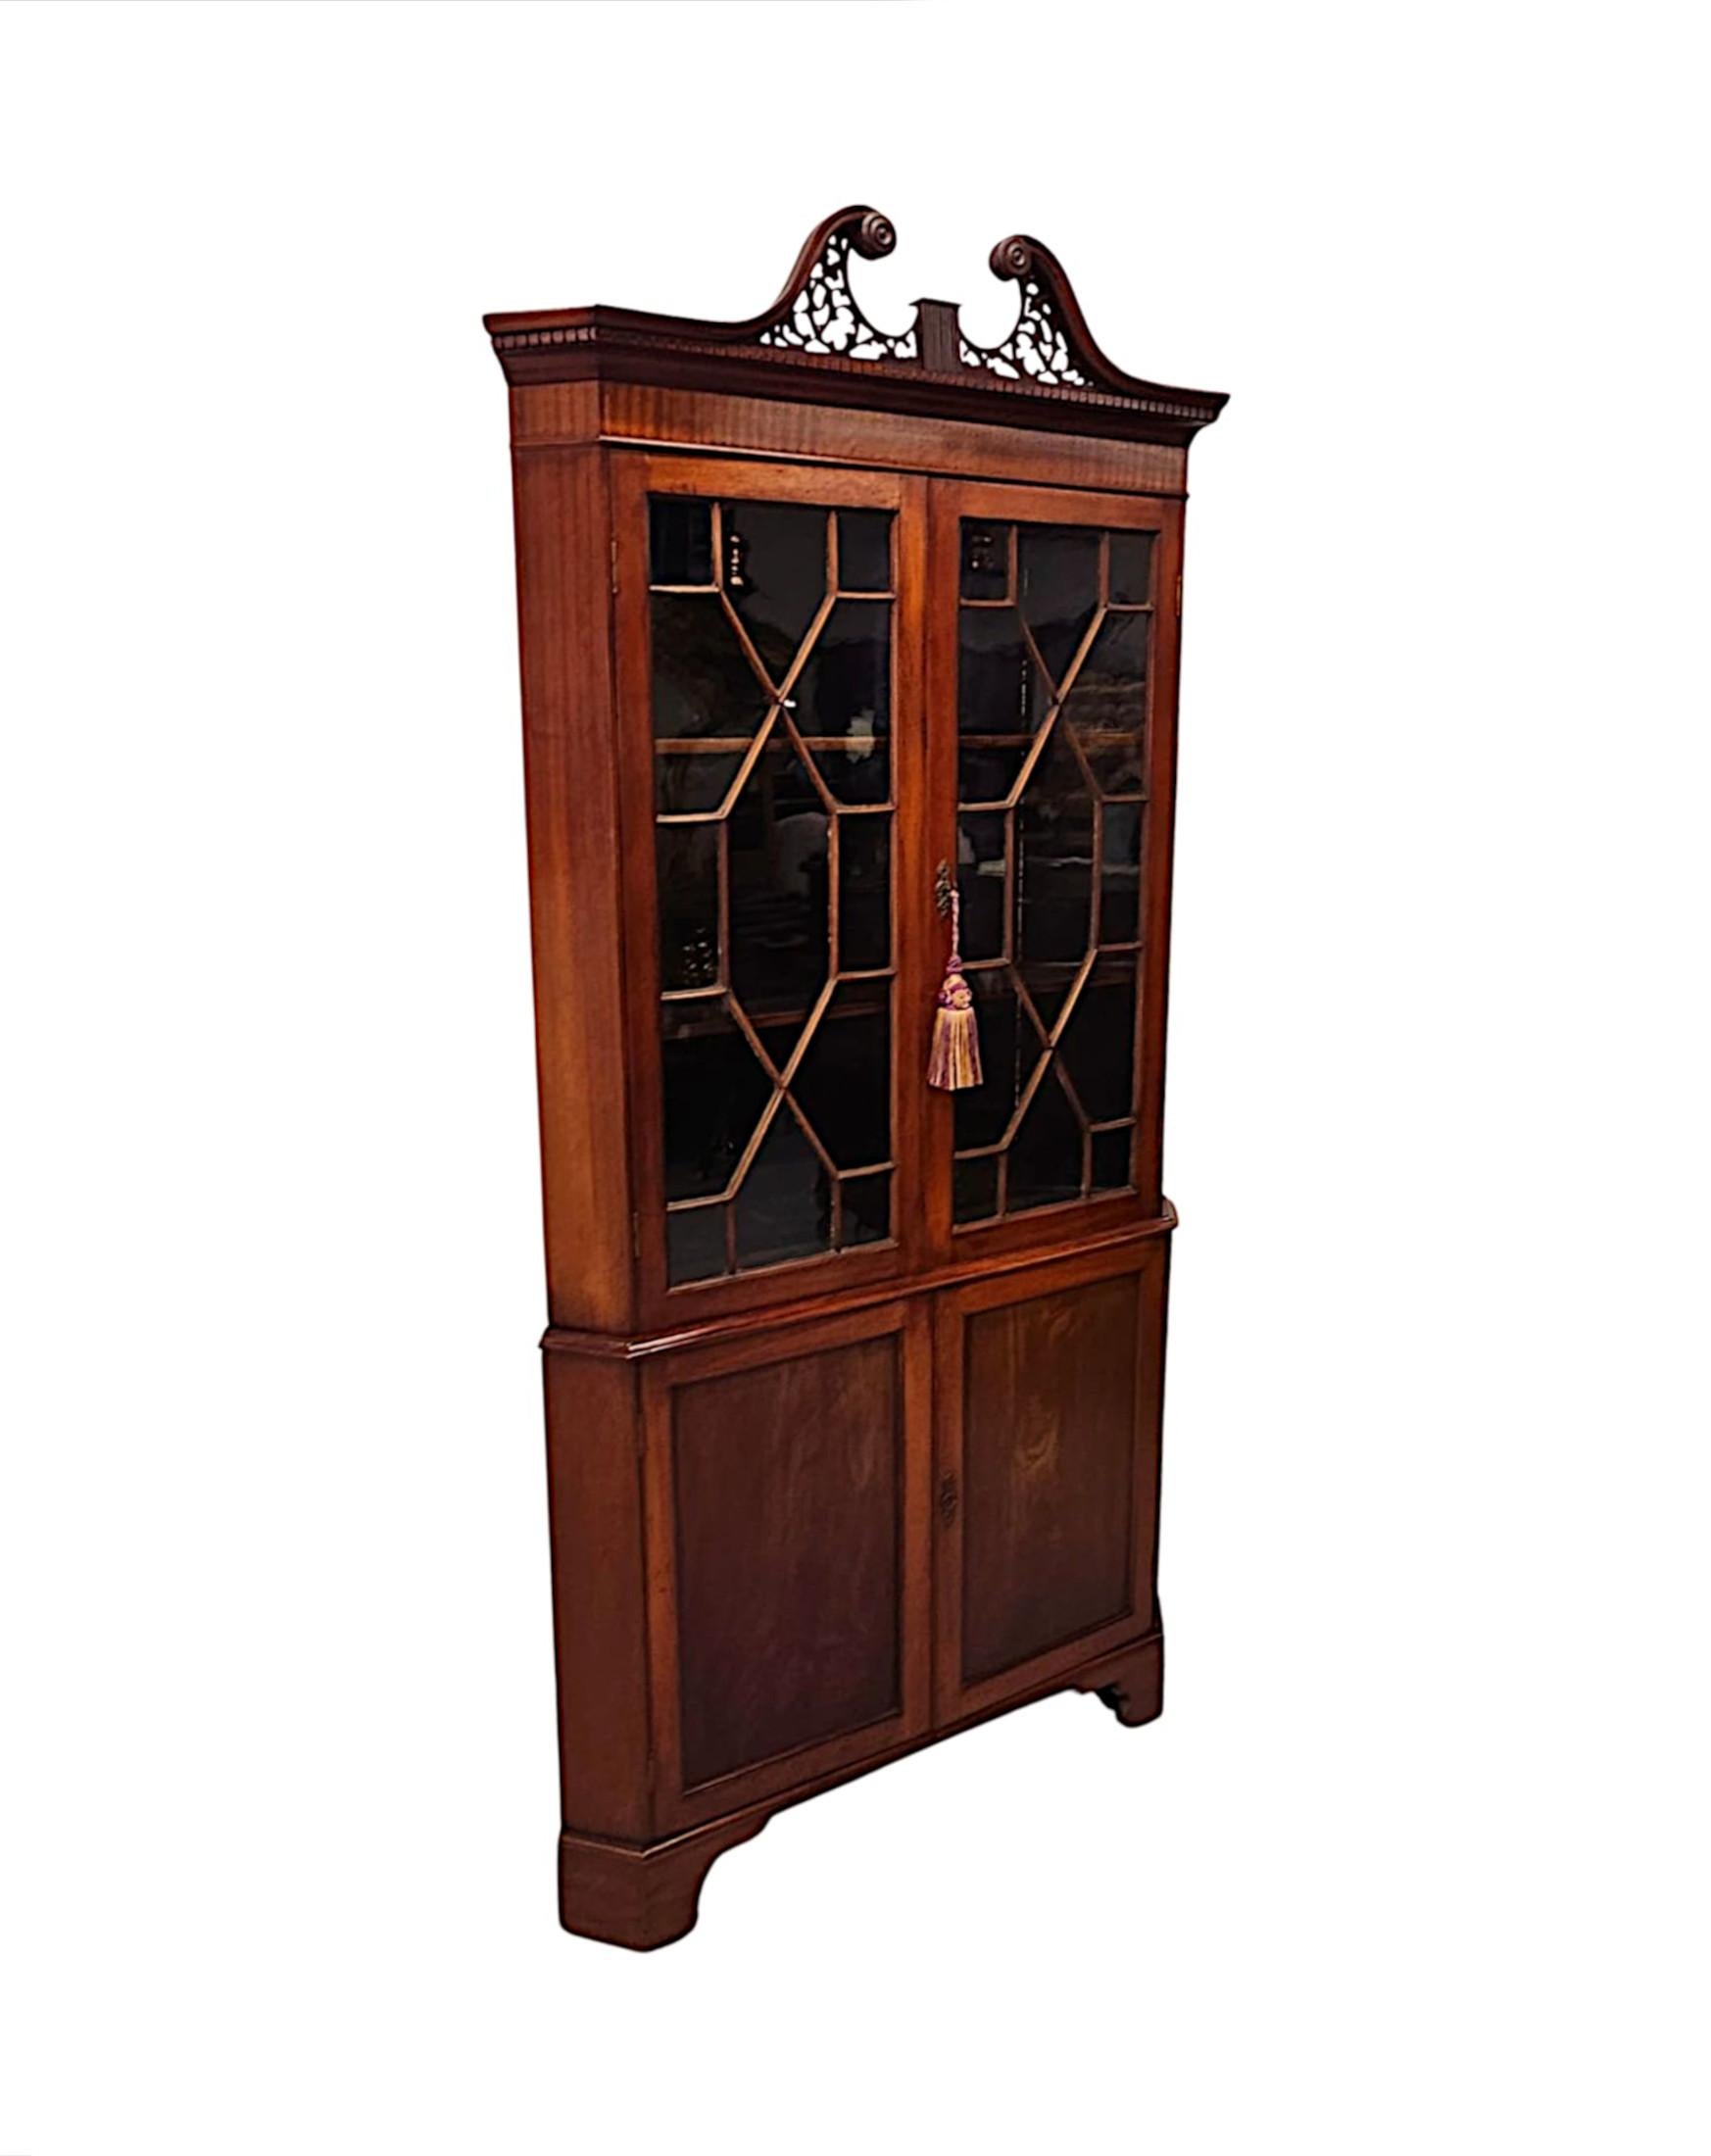 A very fine 19th Century Georgian style finely figured mahogany corner cabinet of exceptional quality, finely hand carved with gorgeously rich patination and grain.  The broken swan neck pediment with stunningly carved open fretwork, foliate and